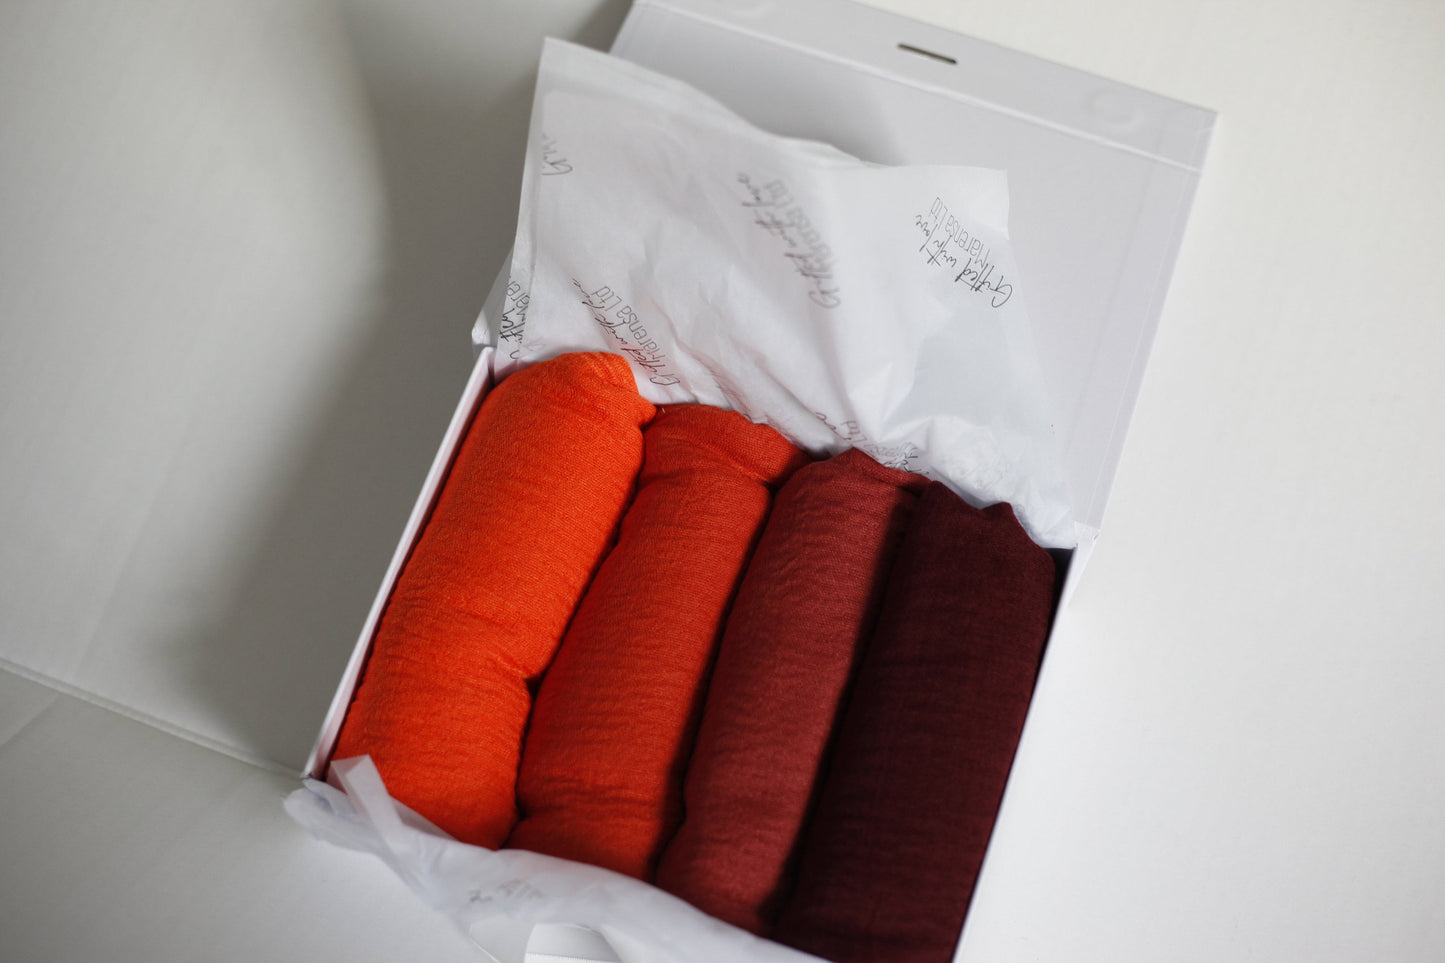 Shades of Orange and maroon crimple scarf with distressed edge, Perfect Eid Hijabs, or if you are gifting hijab gifts, perfectly boxed